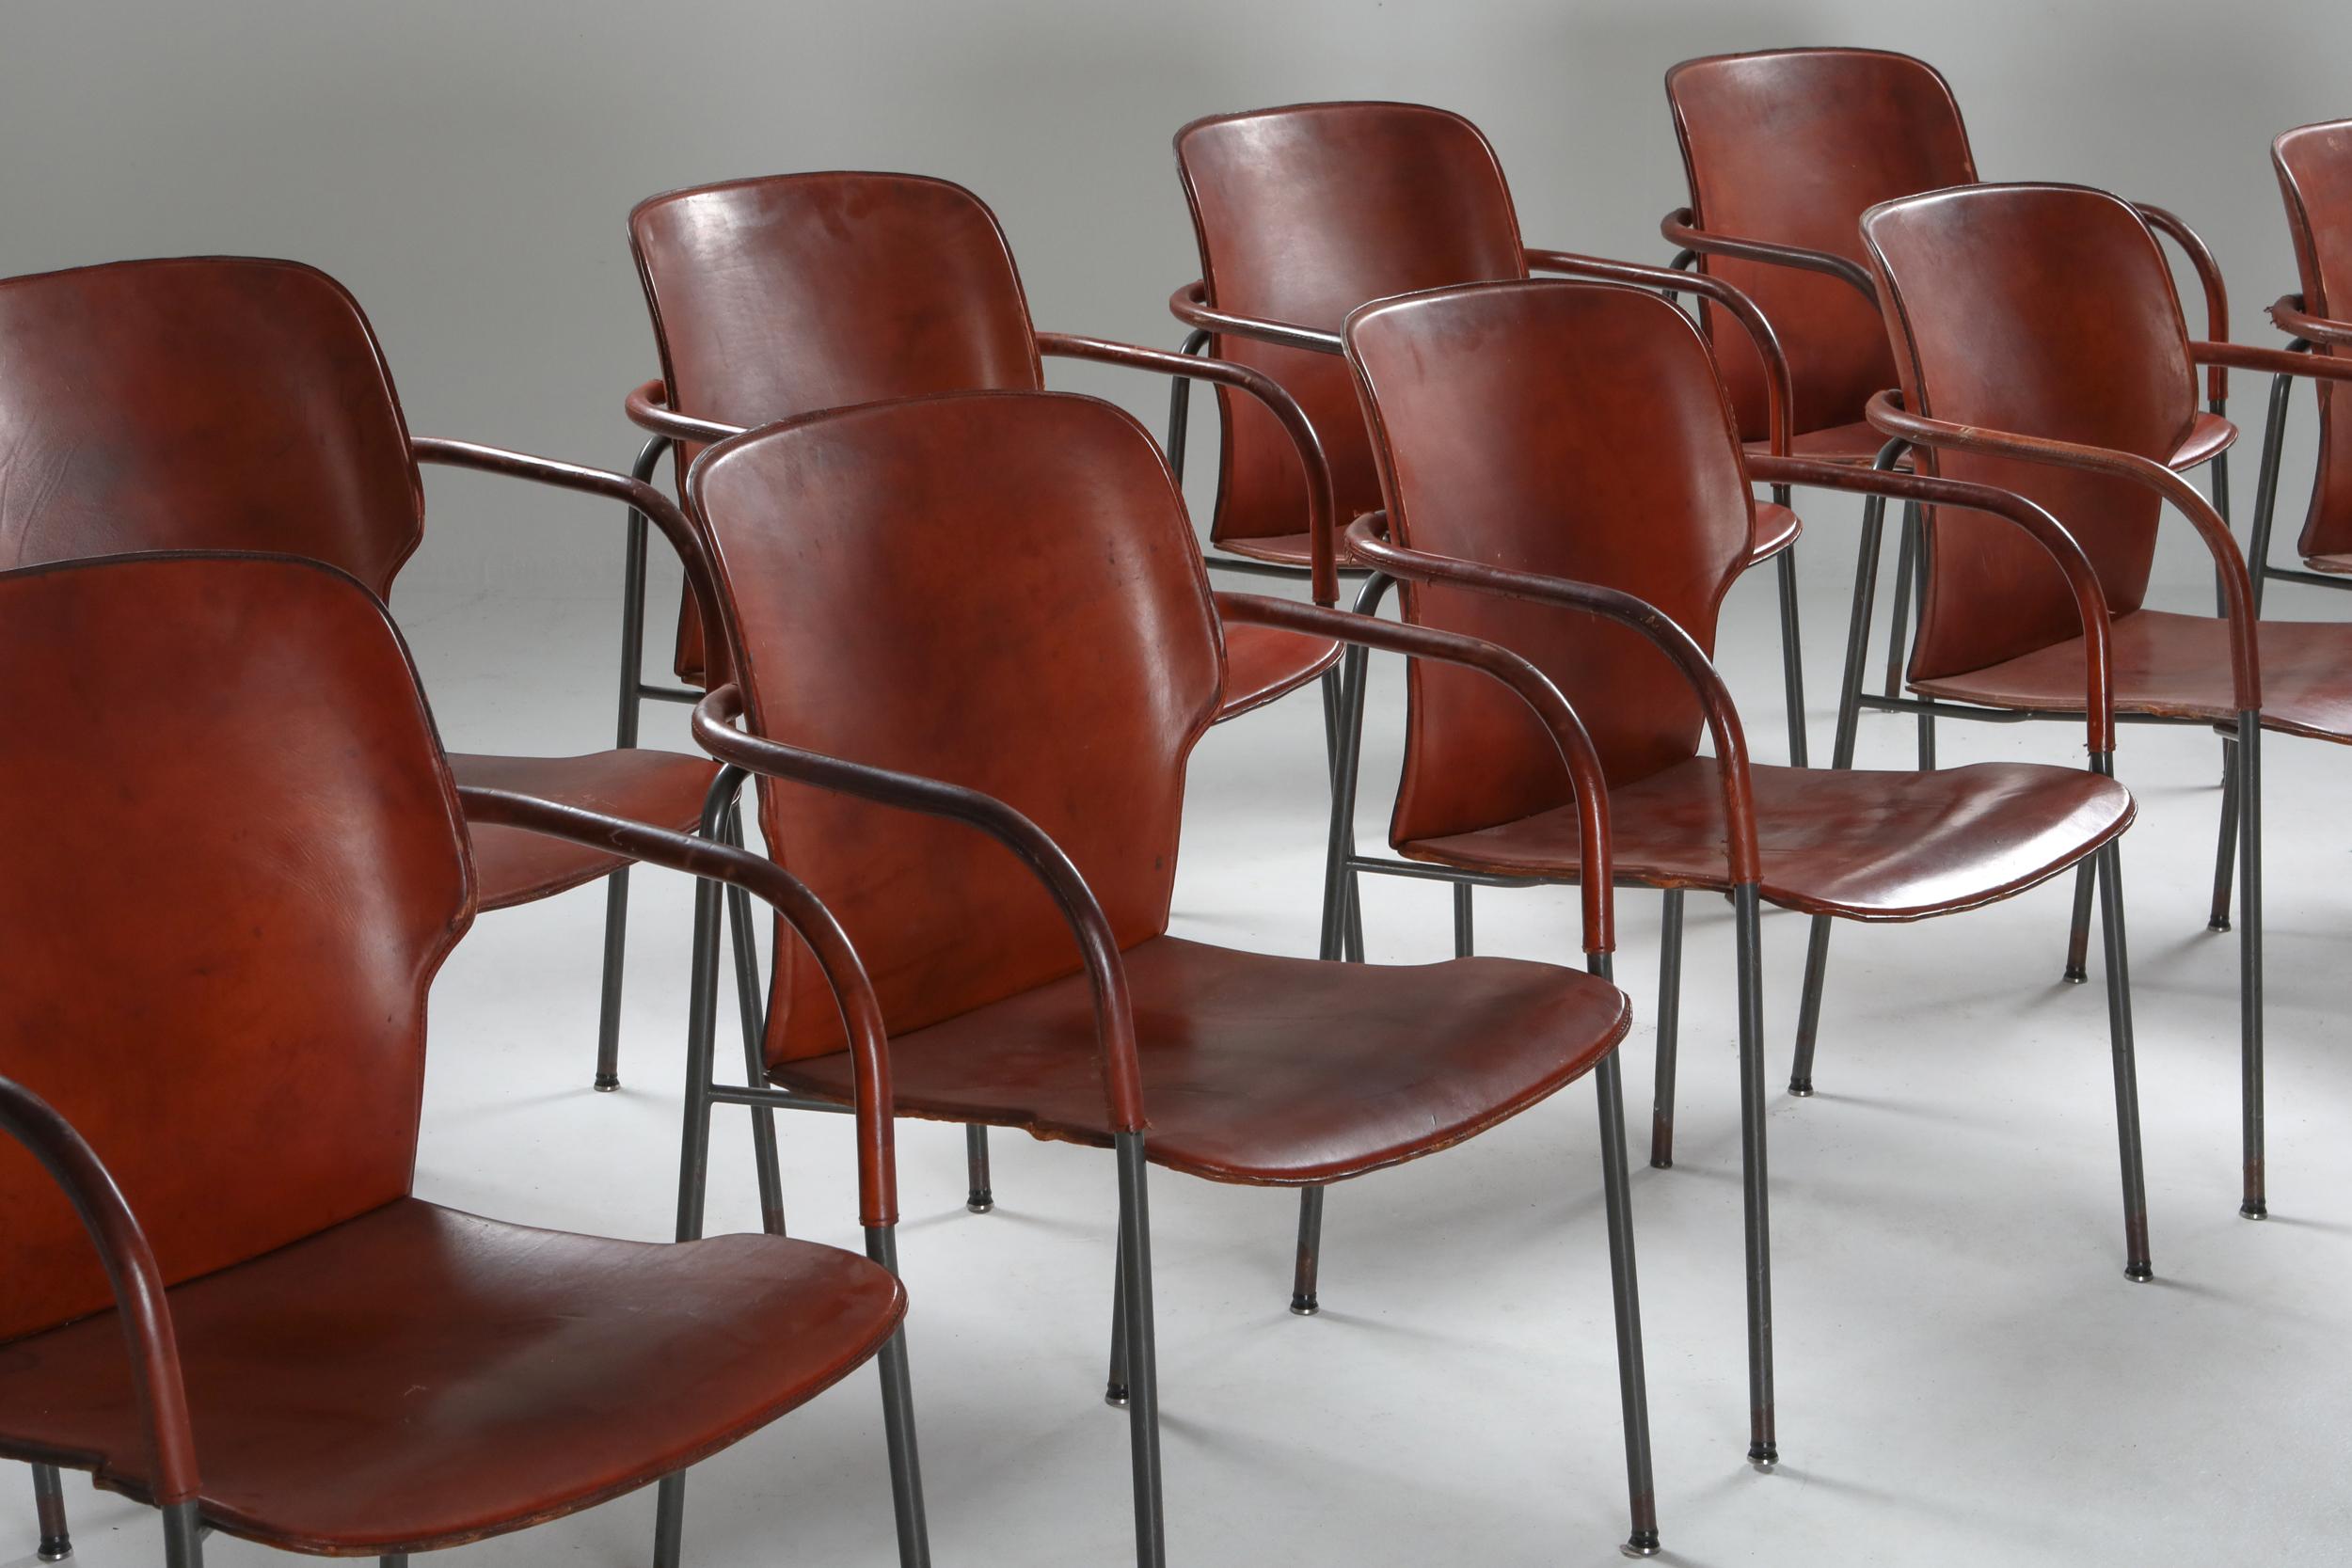 Lalanda chairs, set of six, Gianfranco Frattini, Italy 
Dark grey lacquered frame and cognac/whiskey patinated leather seating.
Magnificent set in every sense, we offer ten pieces in total, super quality, minimal lines, and fantastic patina on the